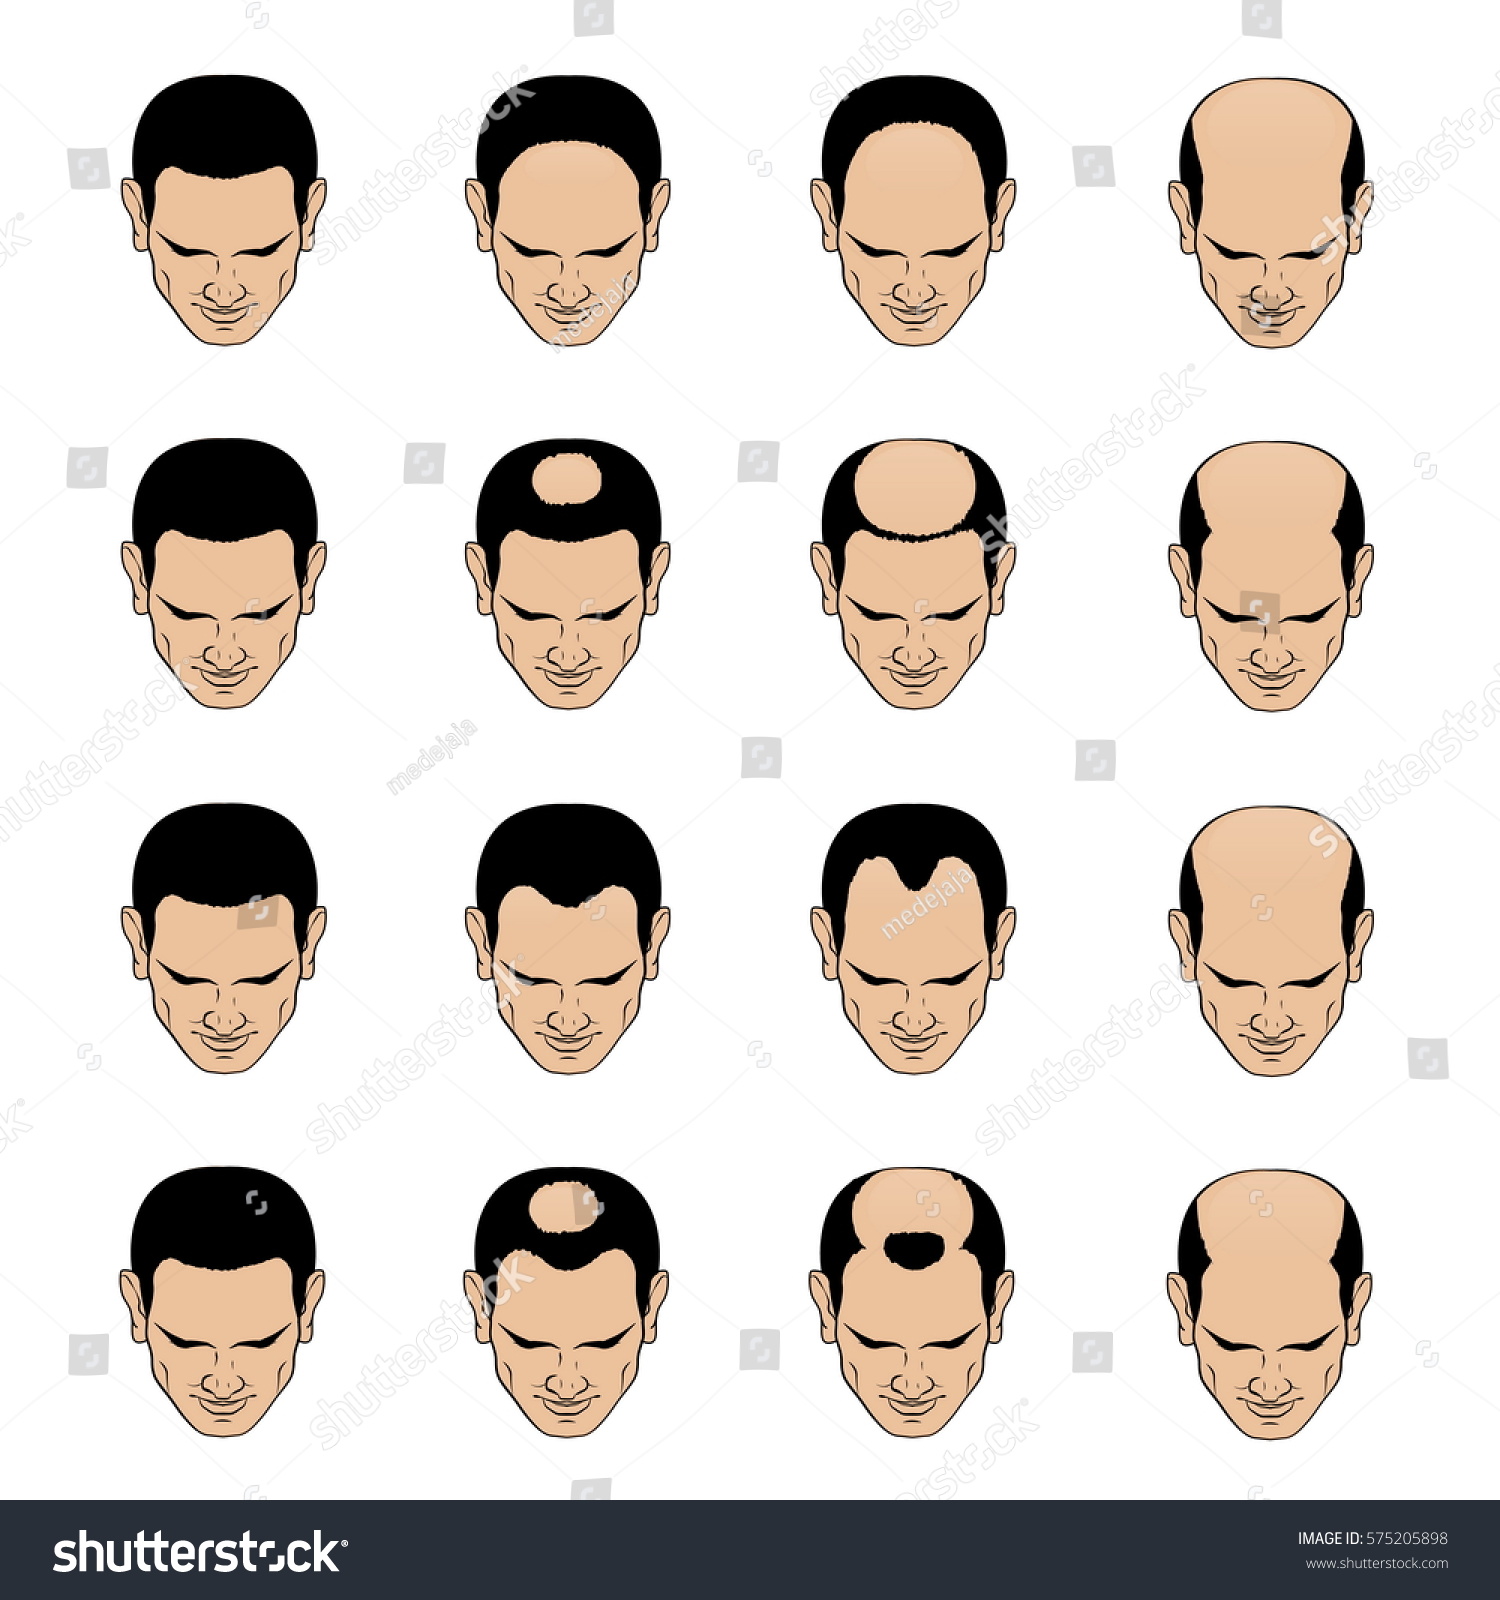 https://image.shutterstock.com/z/stock-vector-information-chart-showing-types-and-stages-of-hair-loss-for-men-bolding-head-from-full-hair-cover-575205898.jpg